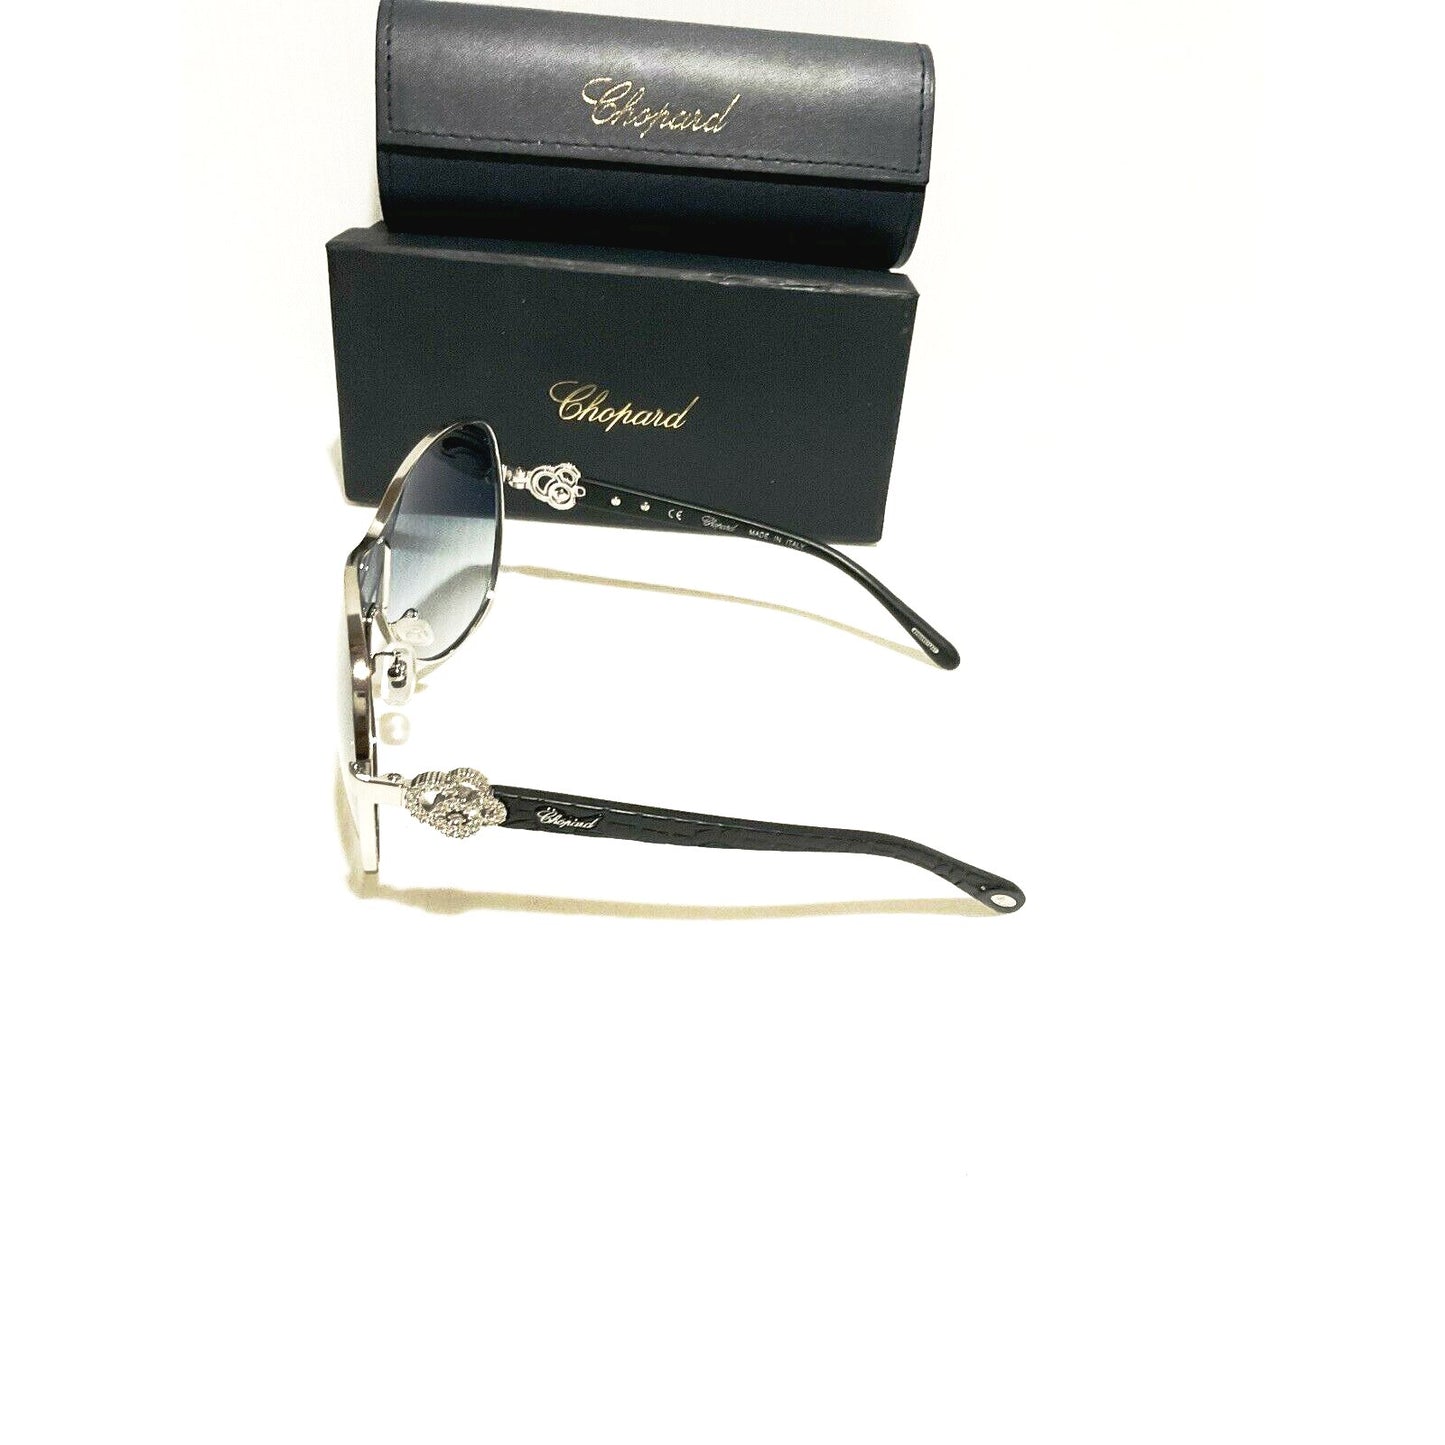 Chopard women sunglasses schc 25s 99 0579 Butterfly Made in Italy